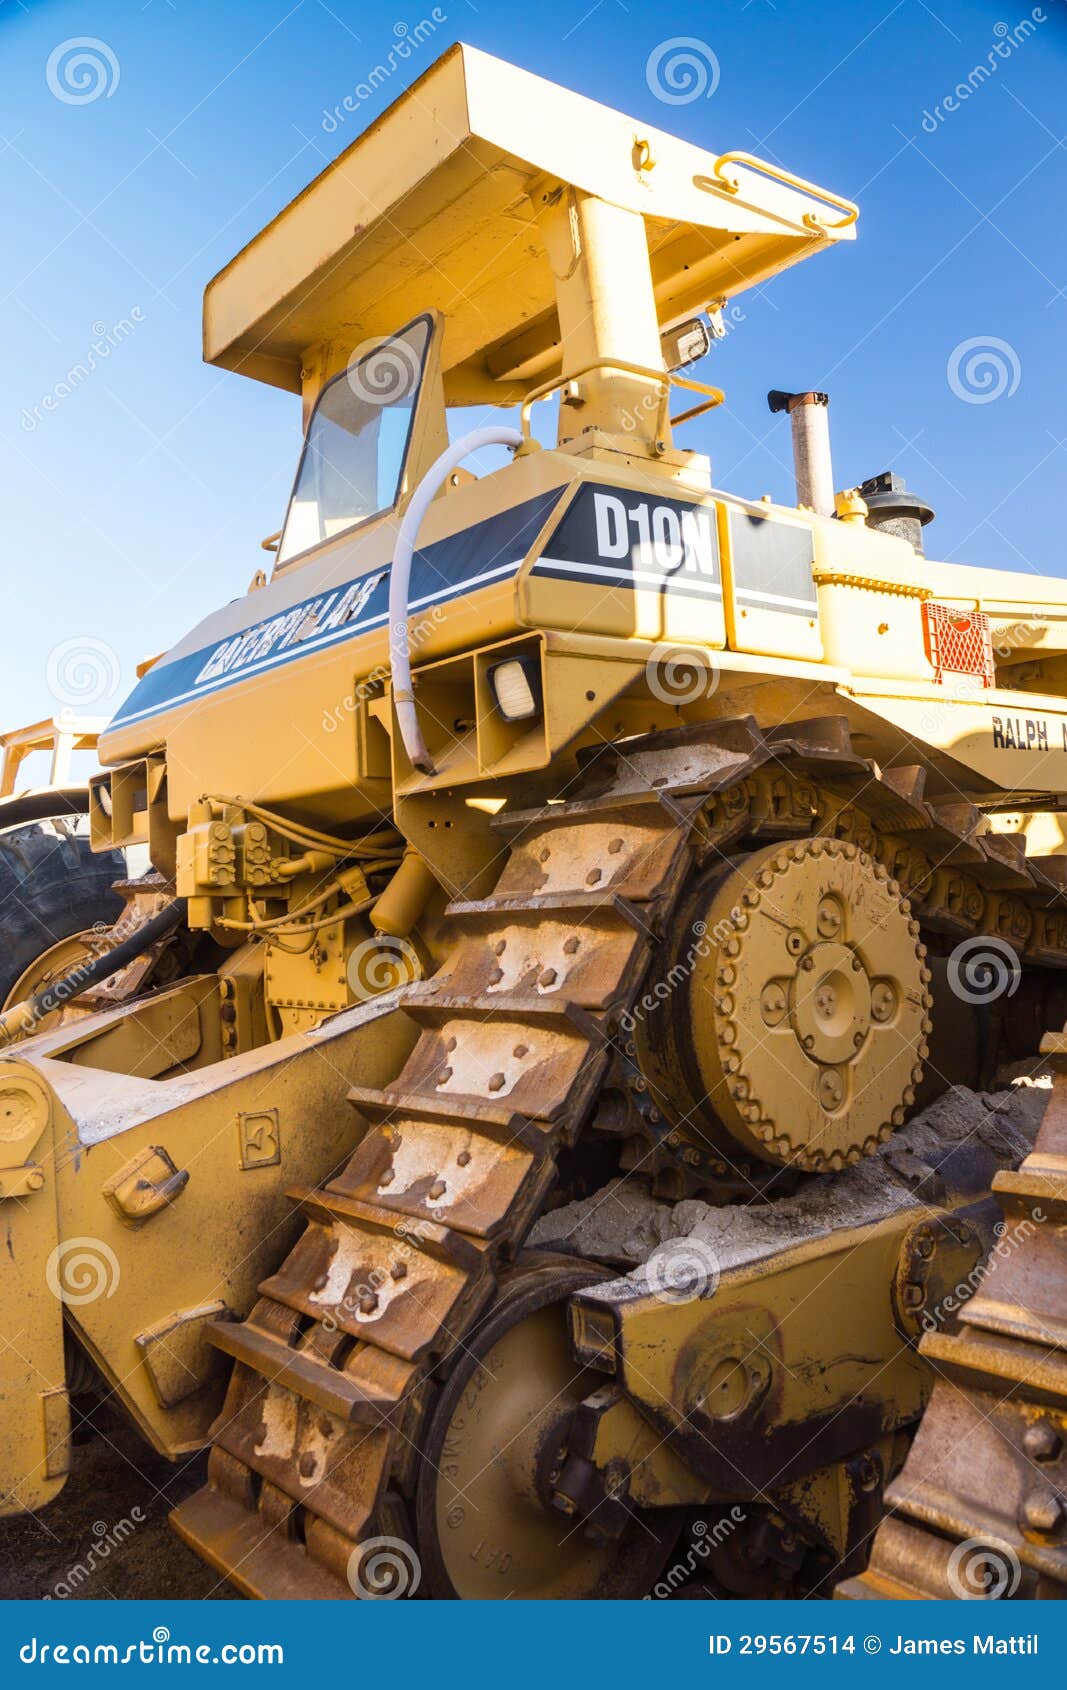 Construction Equipment Editorial Stock Image Image Of D10n 29567514